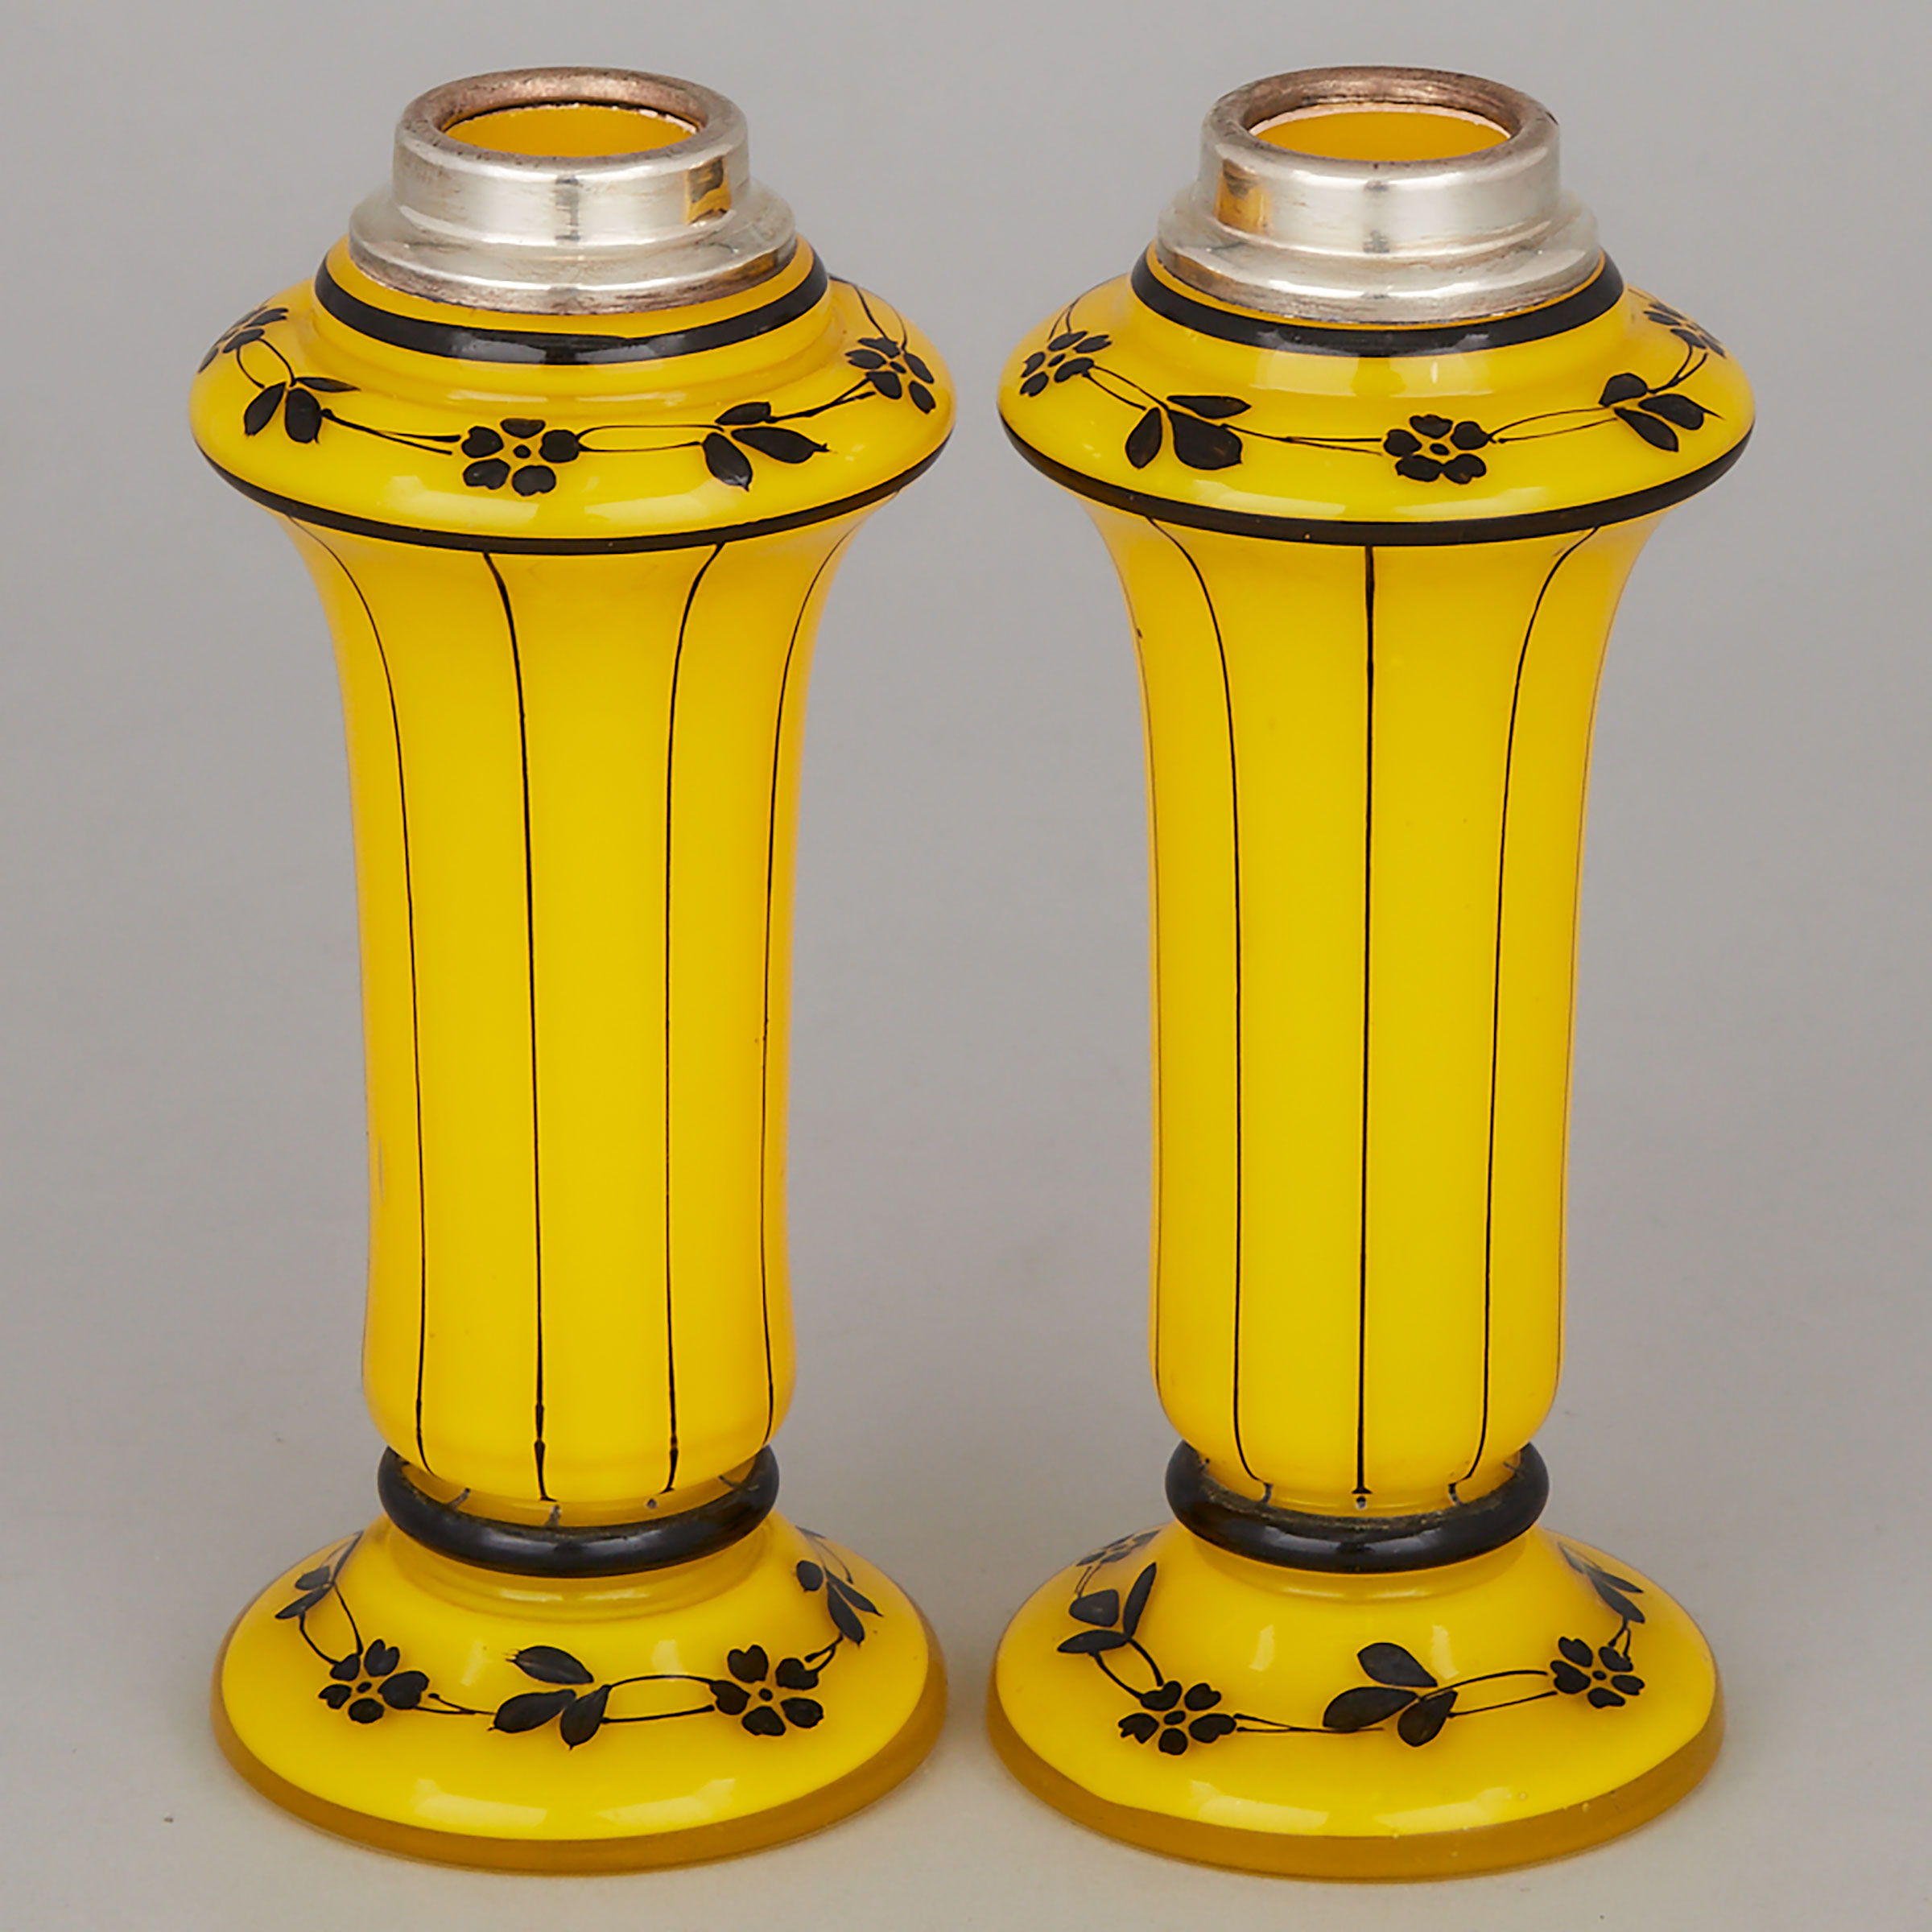 Pair of Silver Mounted Bohemian Enameled Yellow Glass Vases, 1920s